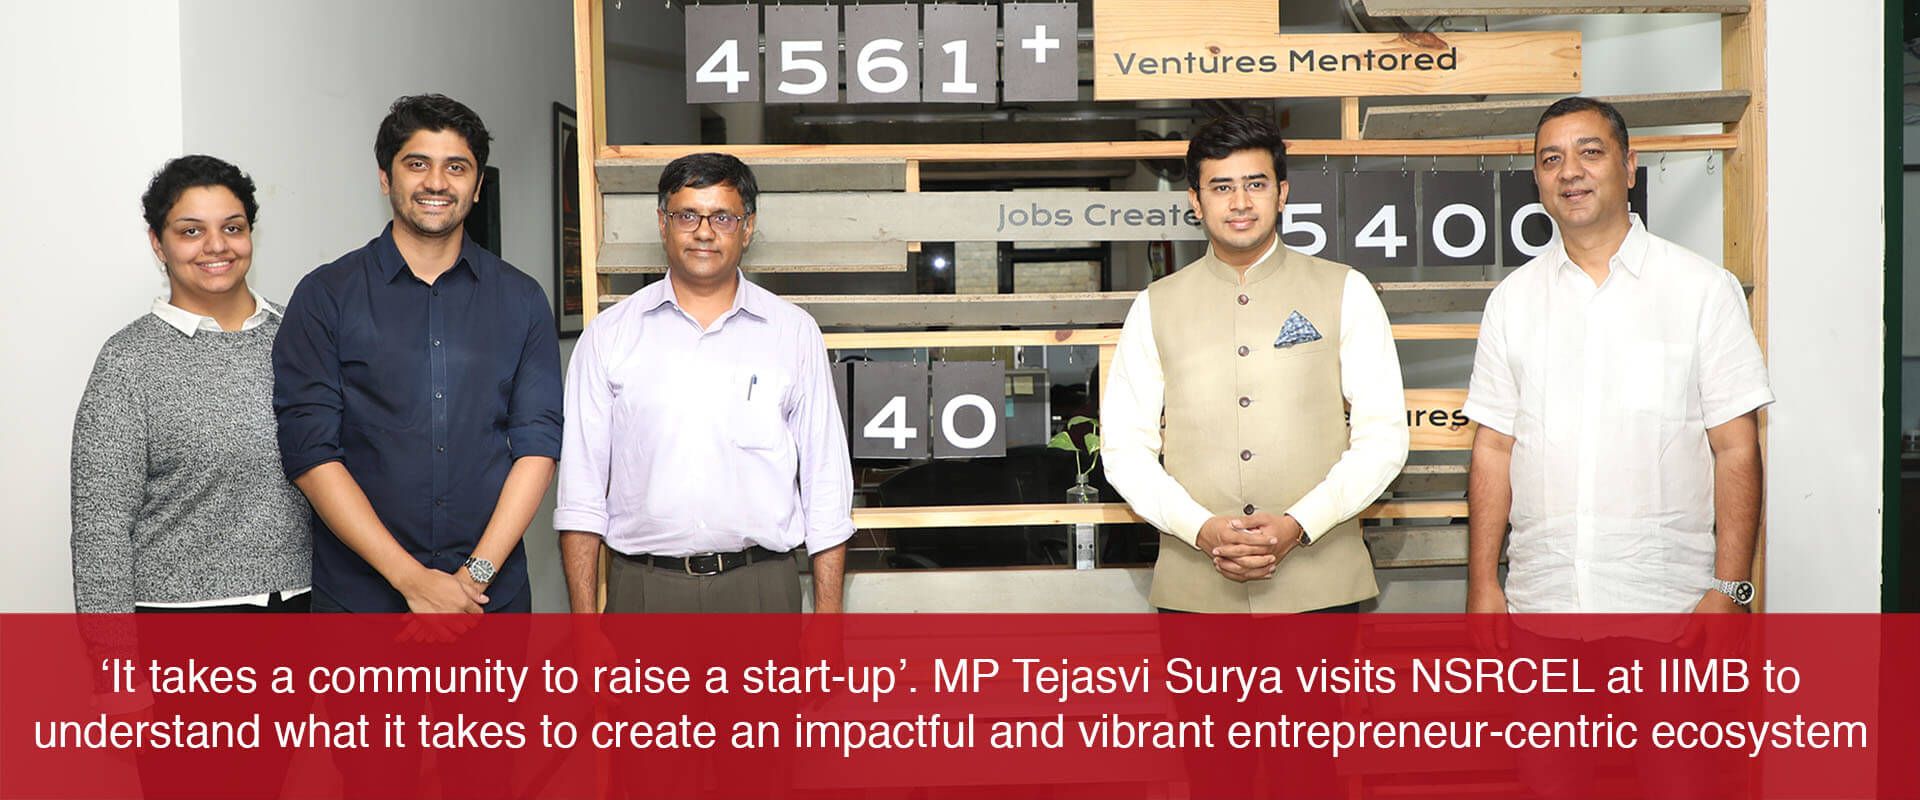 MP Tejasvi Surya visits NSRCEL at IIMB to understand what it takes to create an impactful and vibrant entrepreneur-centric ecosystem 